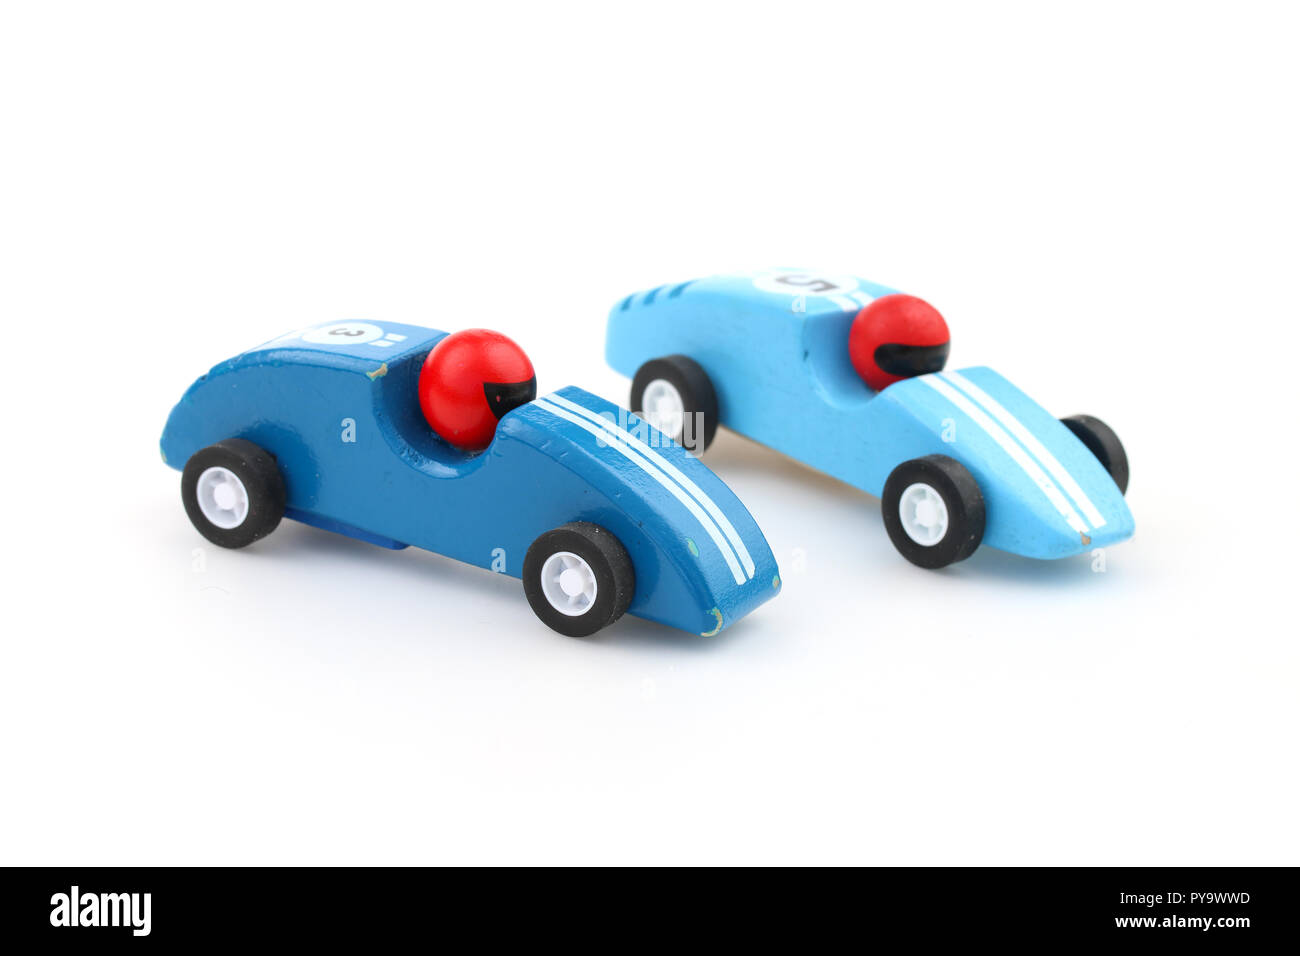 Two blue toy race cars isolated on white Stock Photo